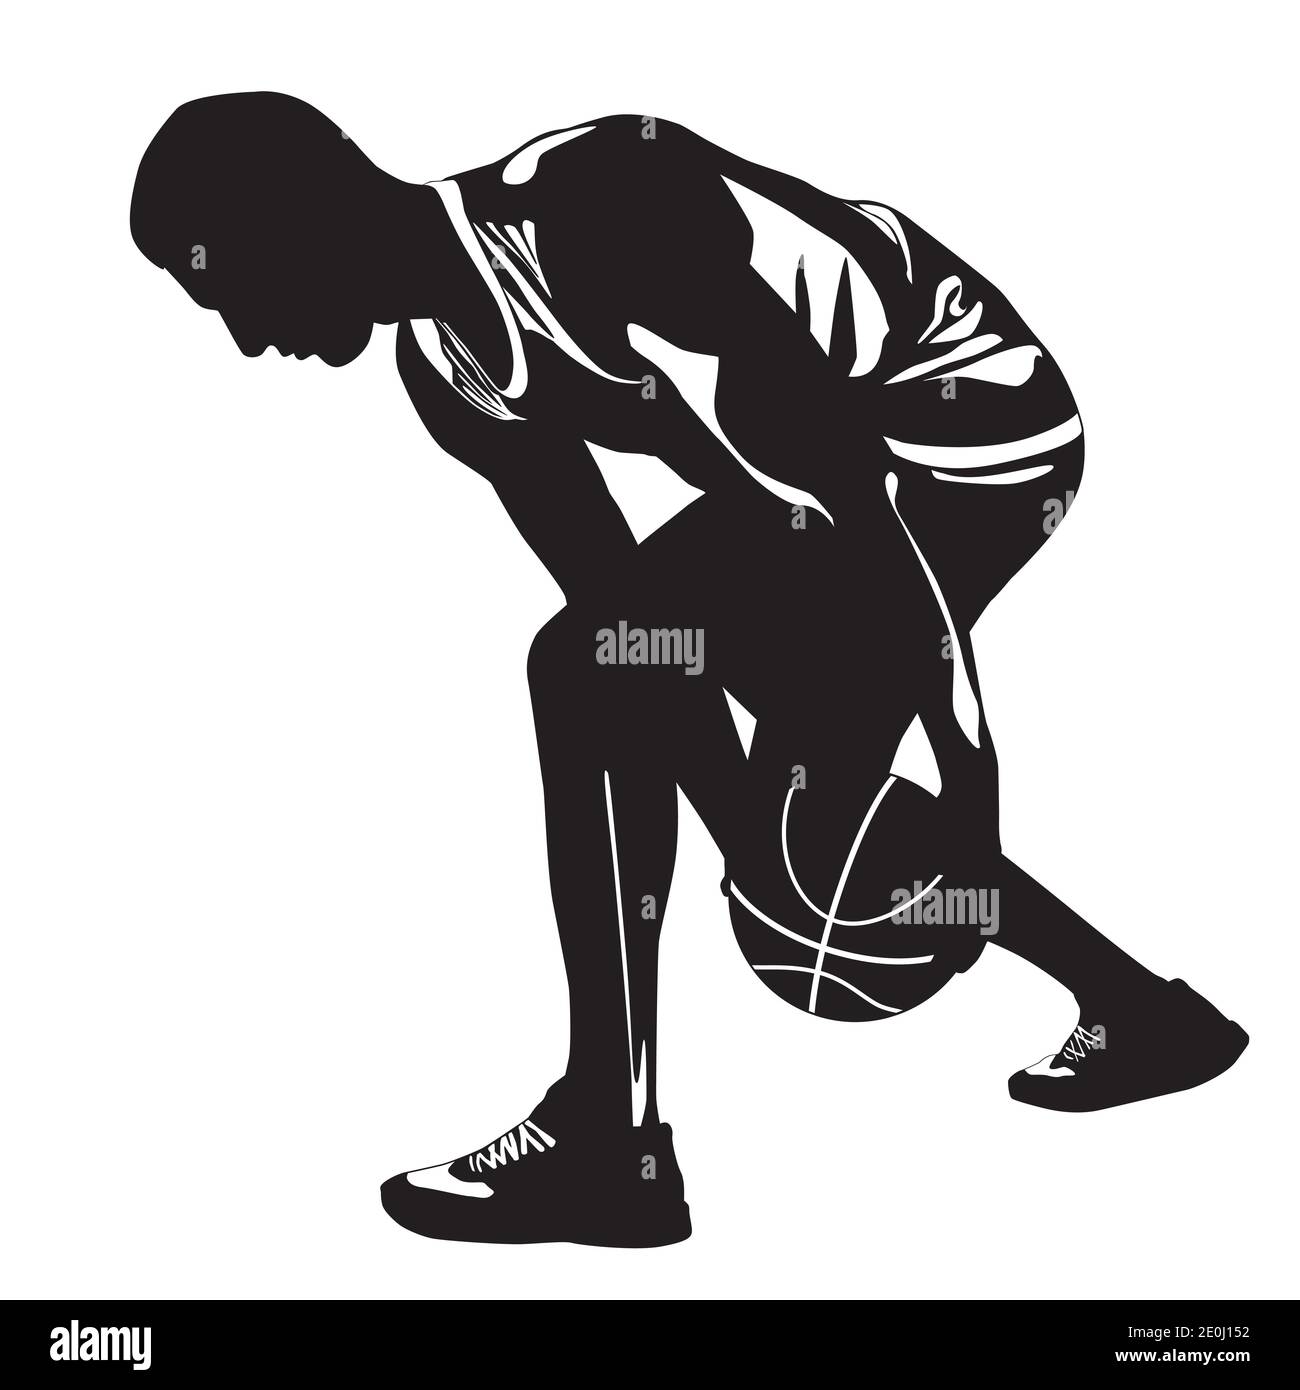 Professional basketball player silhouette with ball, vector illustration. Basketball crossover dribbling skills. Stock Vector